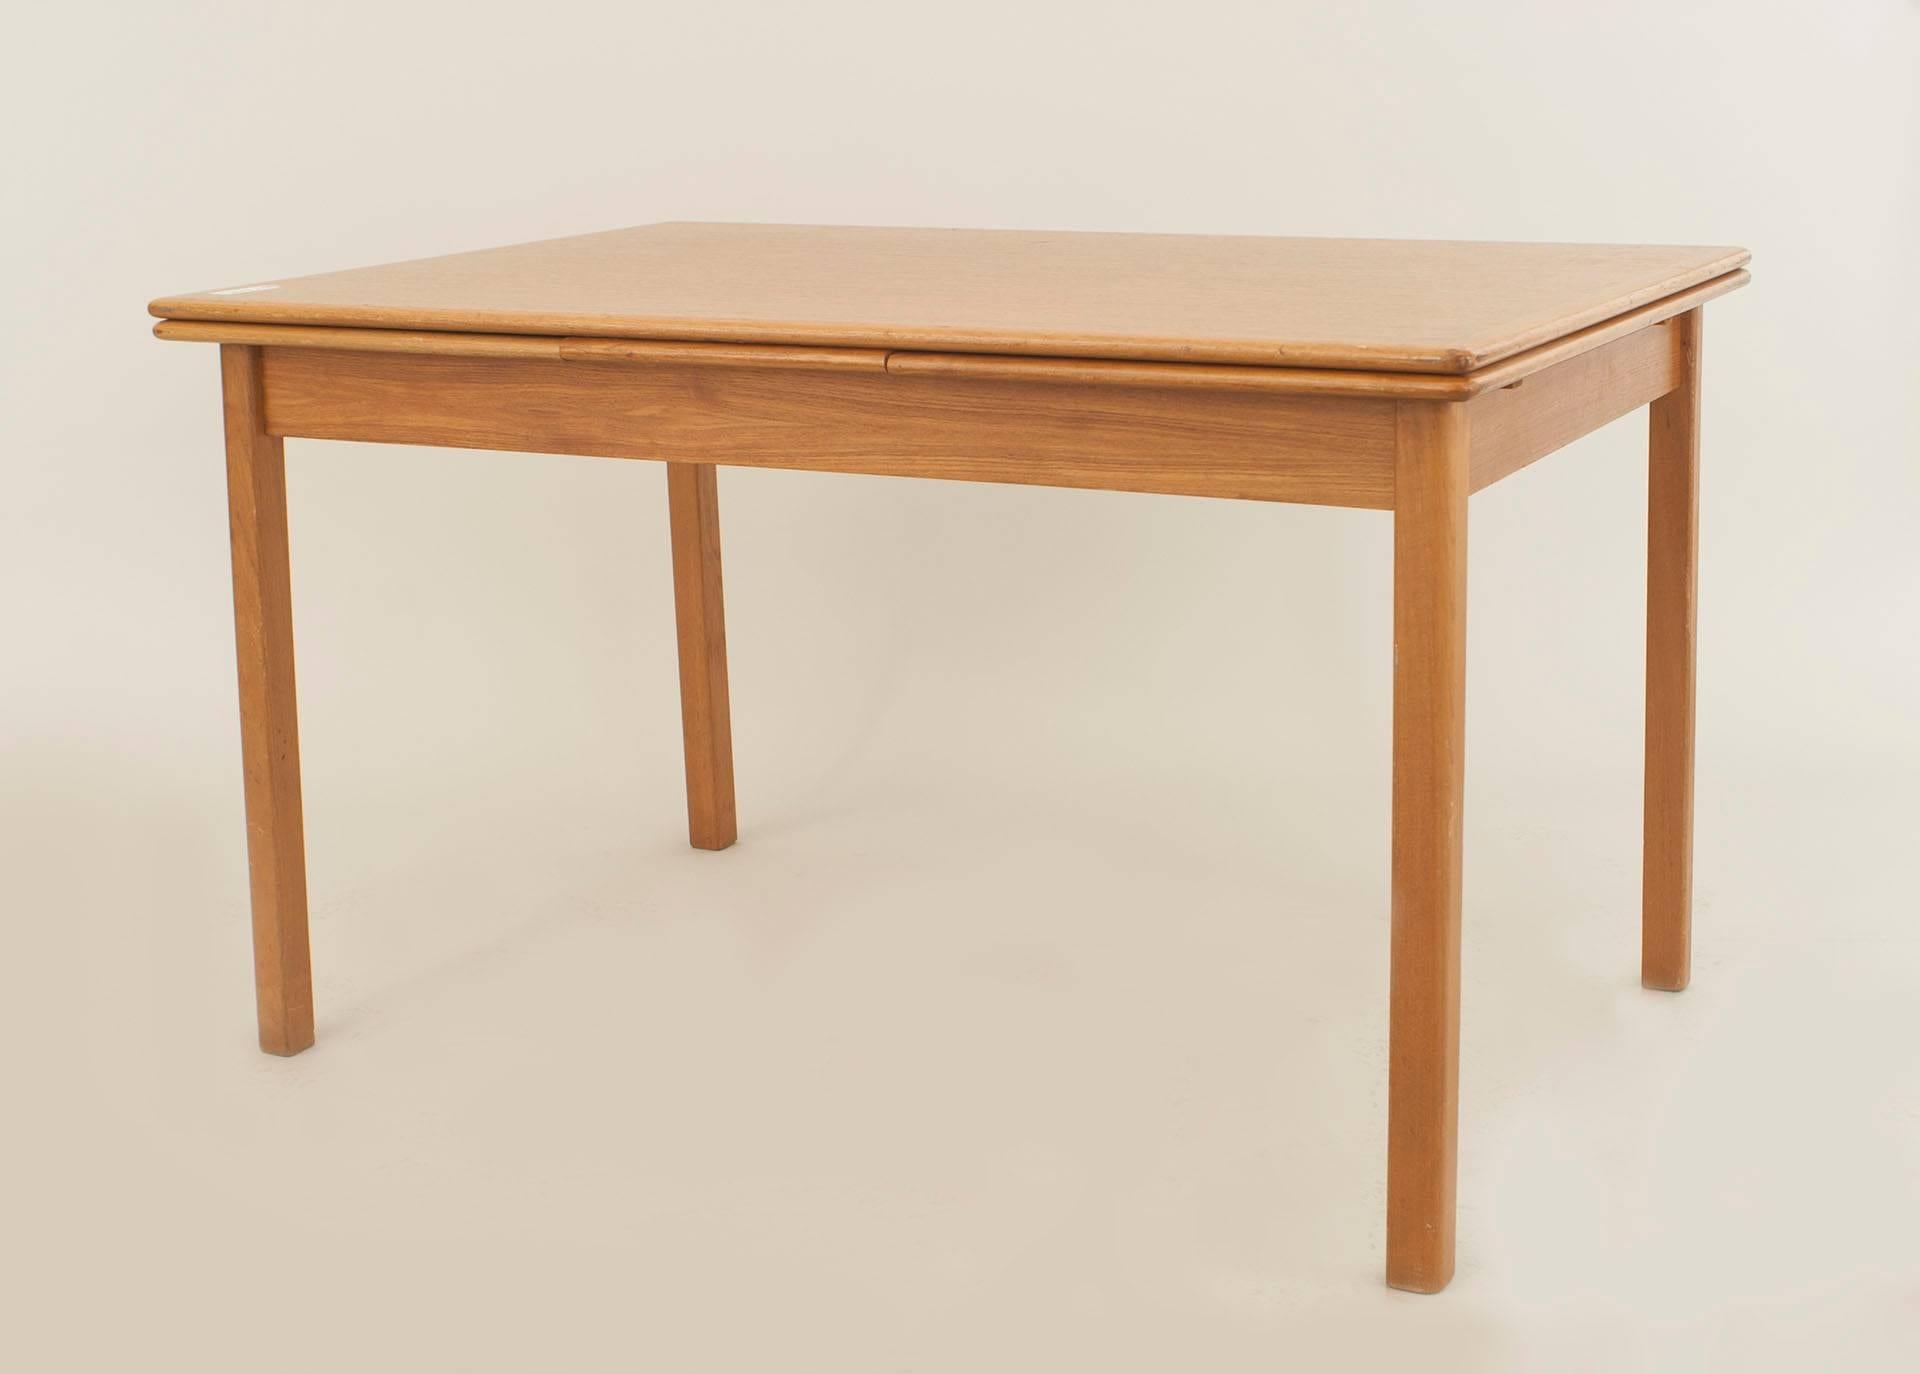 Danish Post-War Design expandable teak dining table supported on square legs. (Opened length - 86